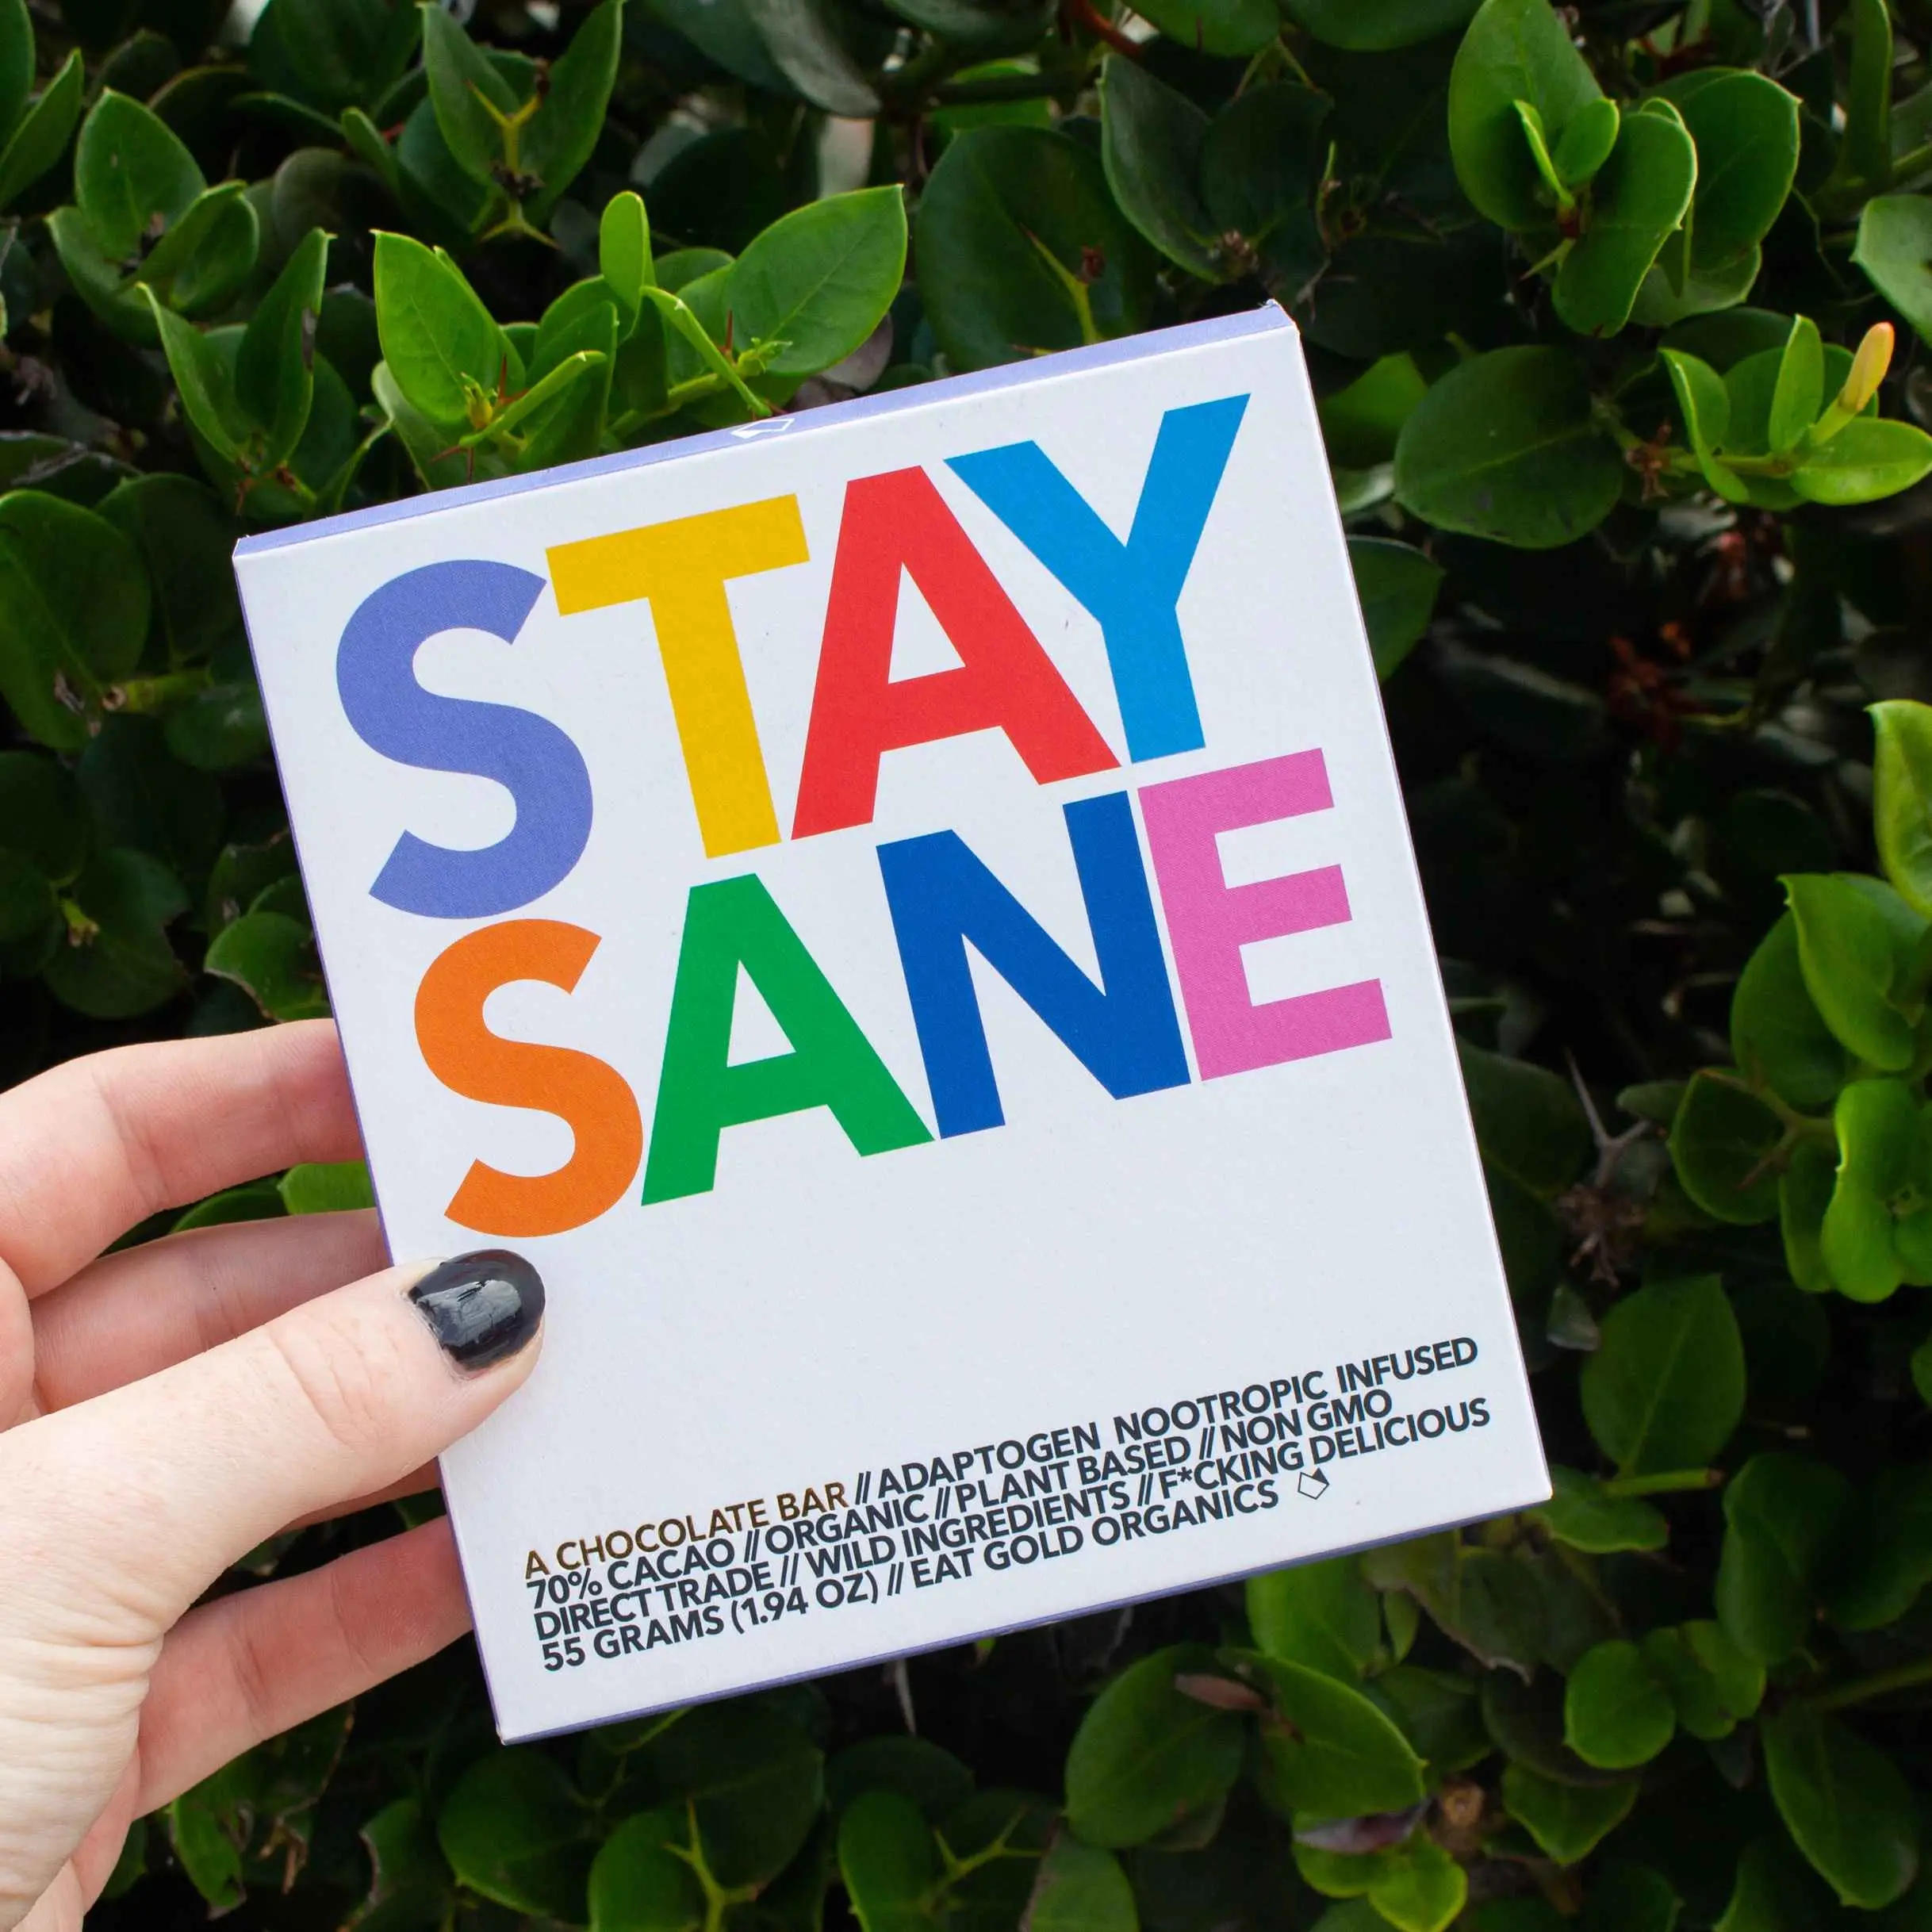 Stay Sane Delivery